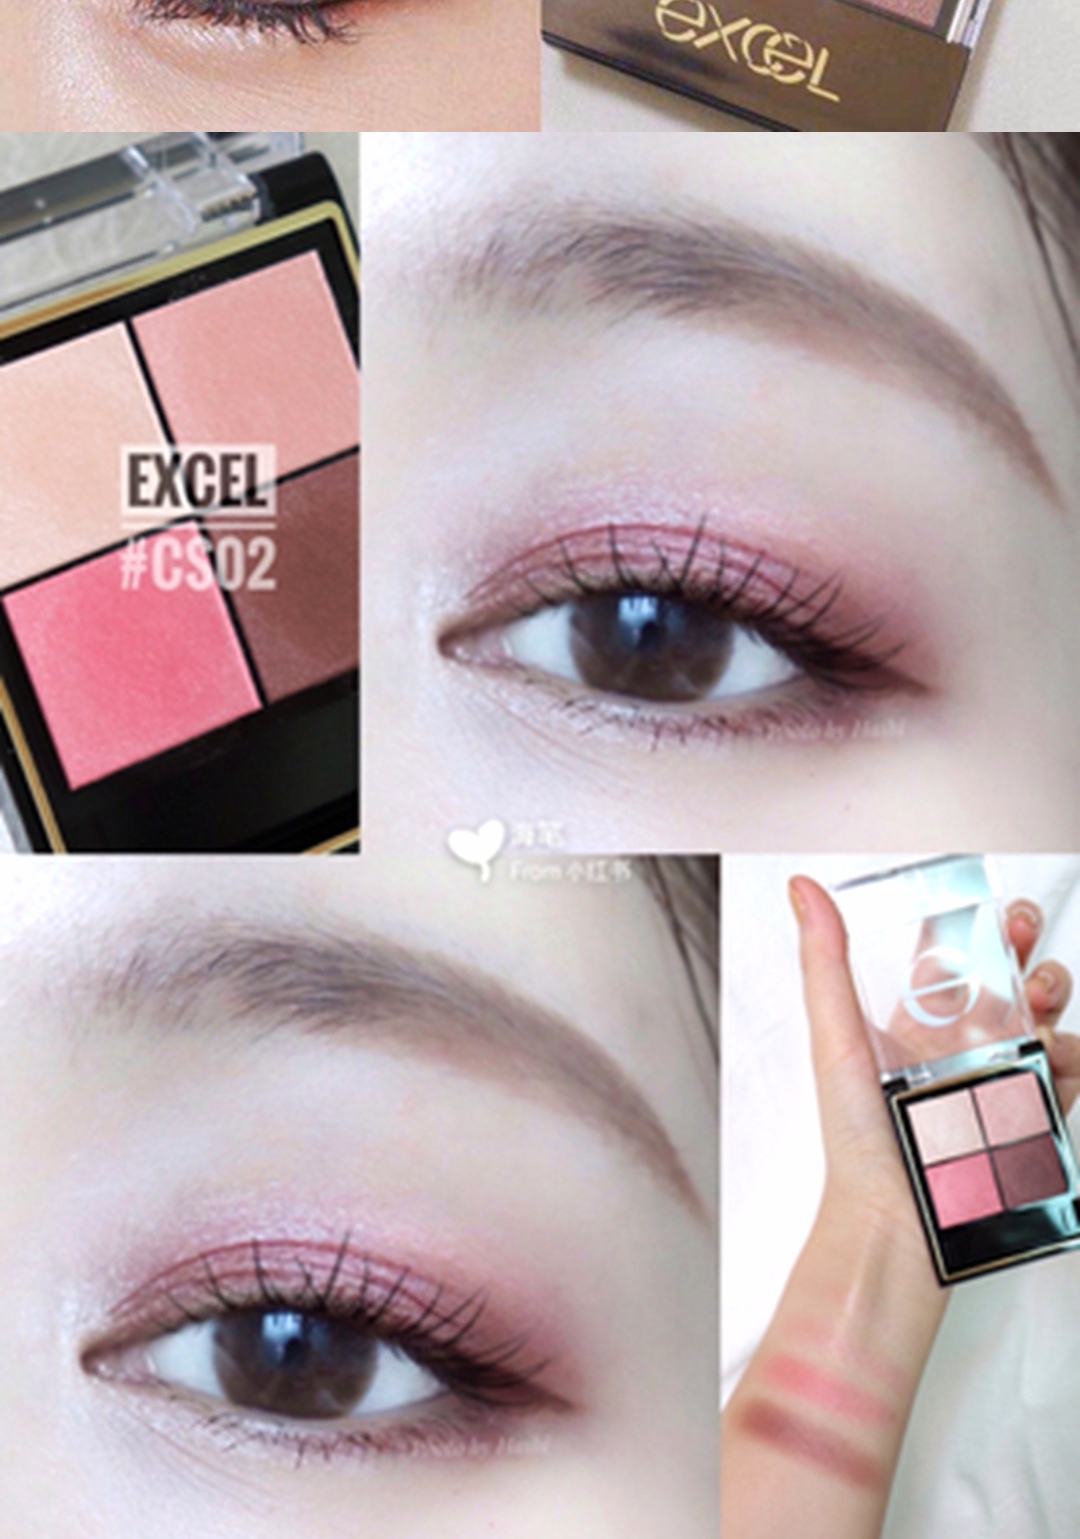 Japanese Sana Excel eye shadow quad natural deep micro pearl powder delicate smooth novice recommendation